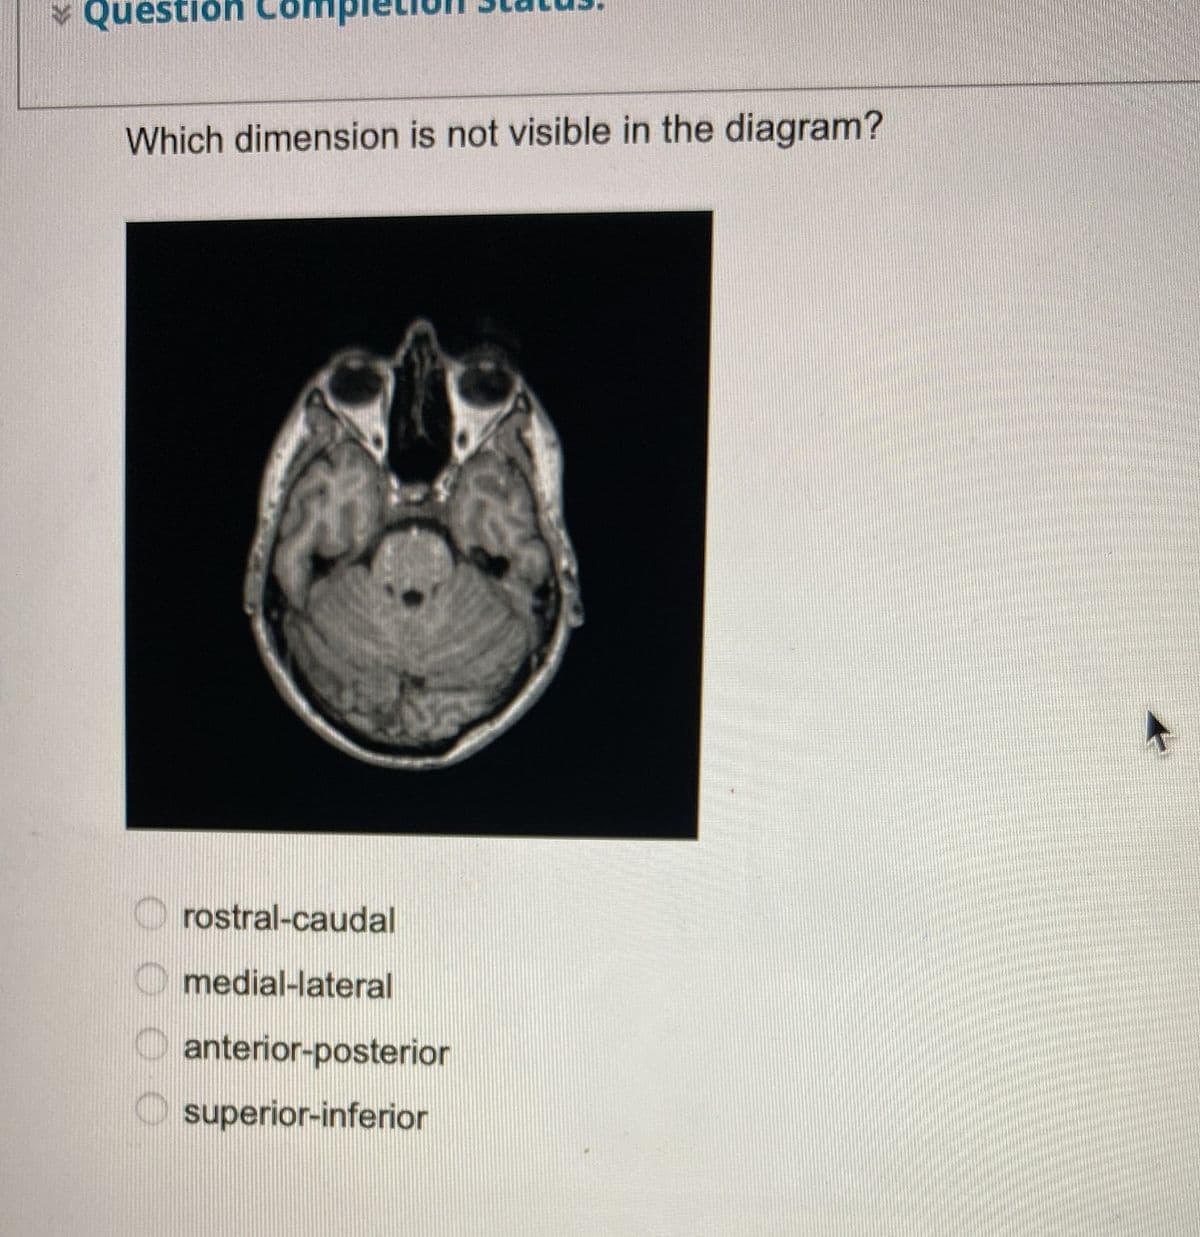 Question Co
Which dimension is not visible in the diagram?
rostral-caudal
medial-lateral
anterior-posterior
superior-inferior